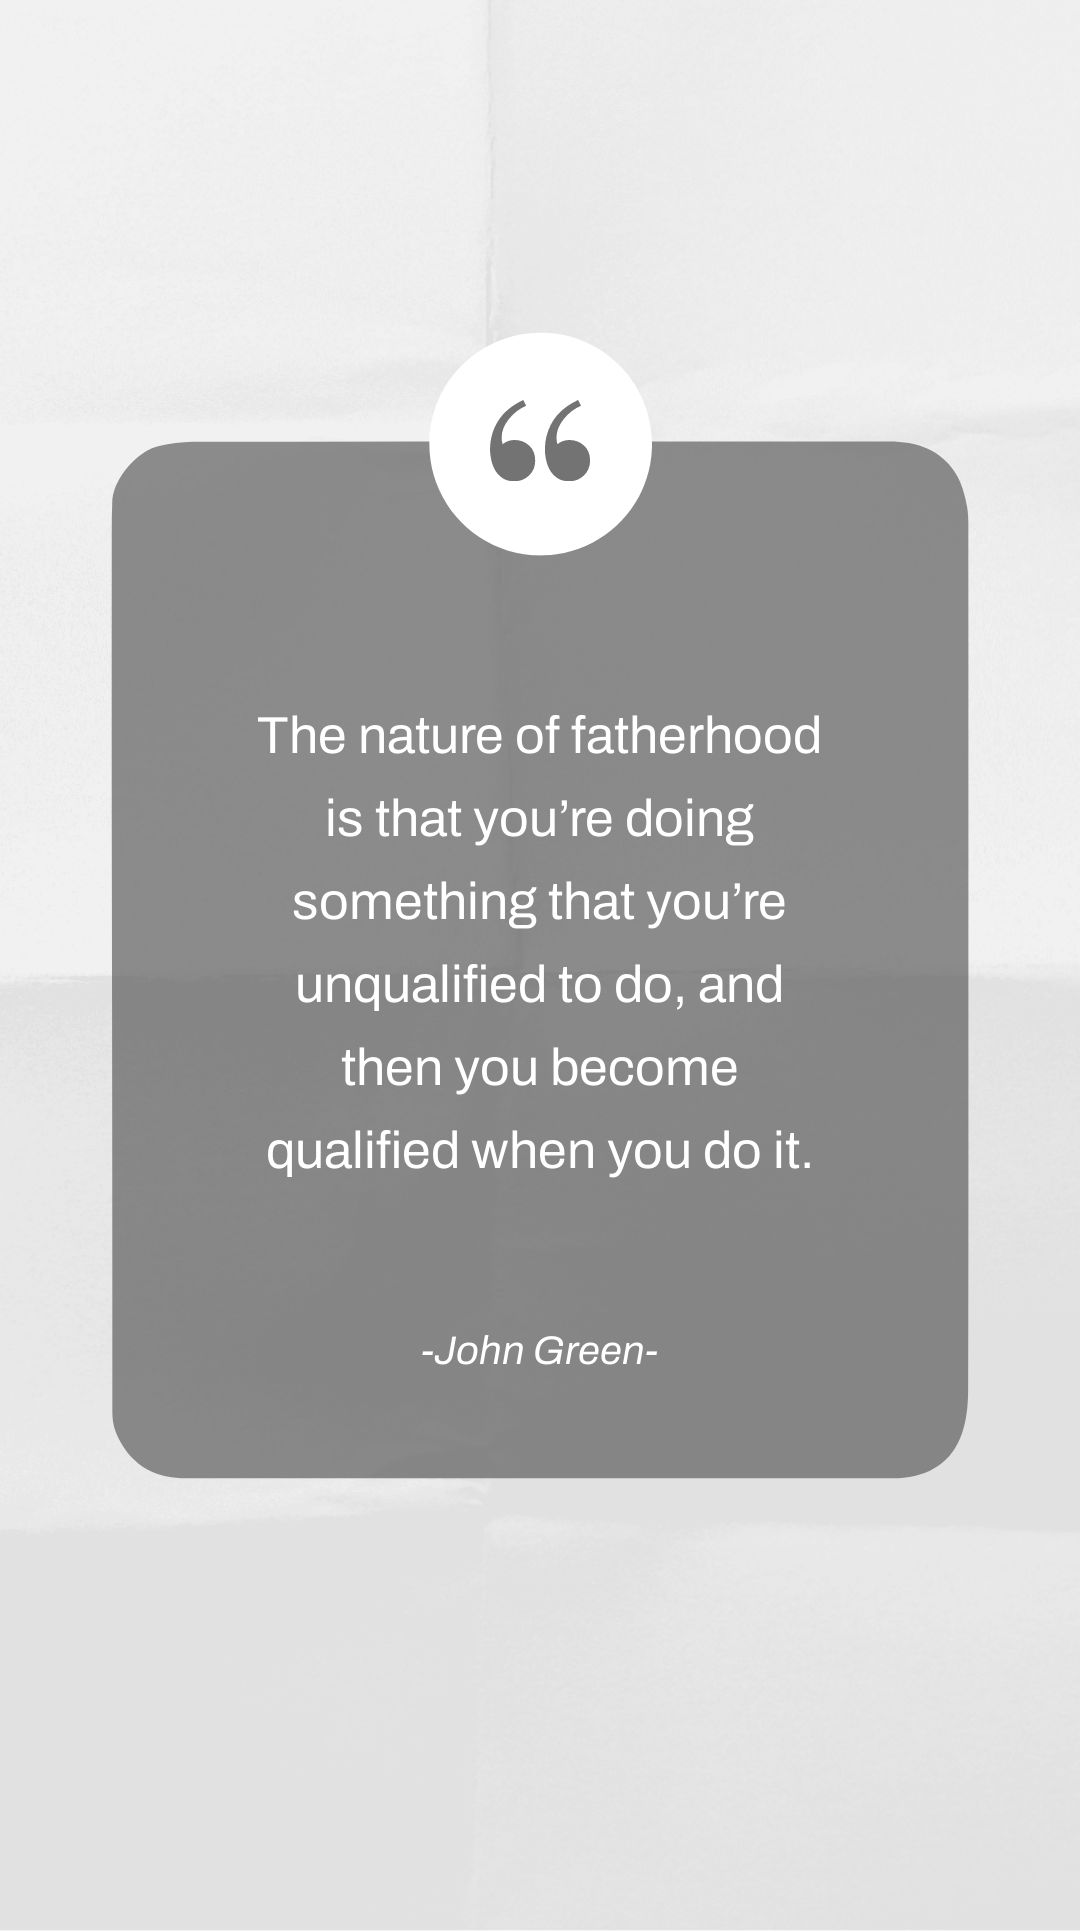 Free John Green - The nature of fatherhood is that you’re doing something that you’re unqualified to do, and then you become qualified when you do it.